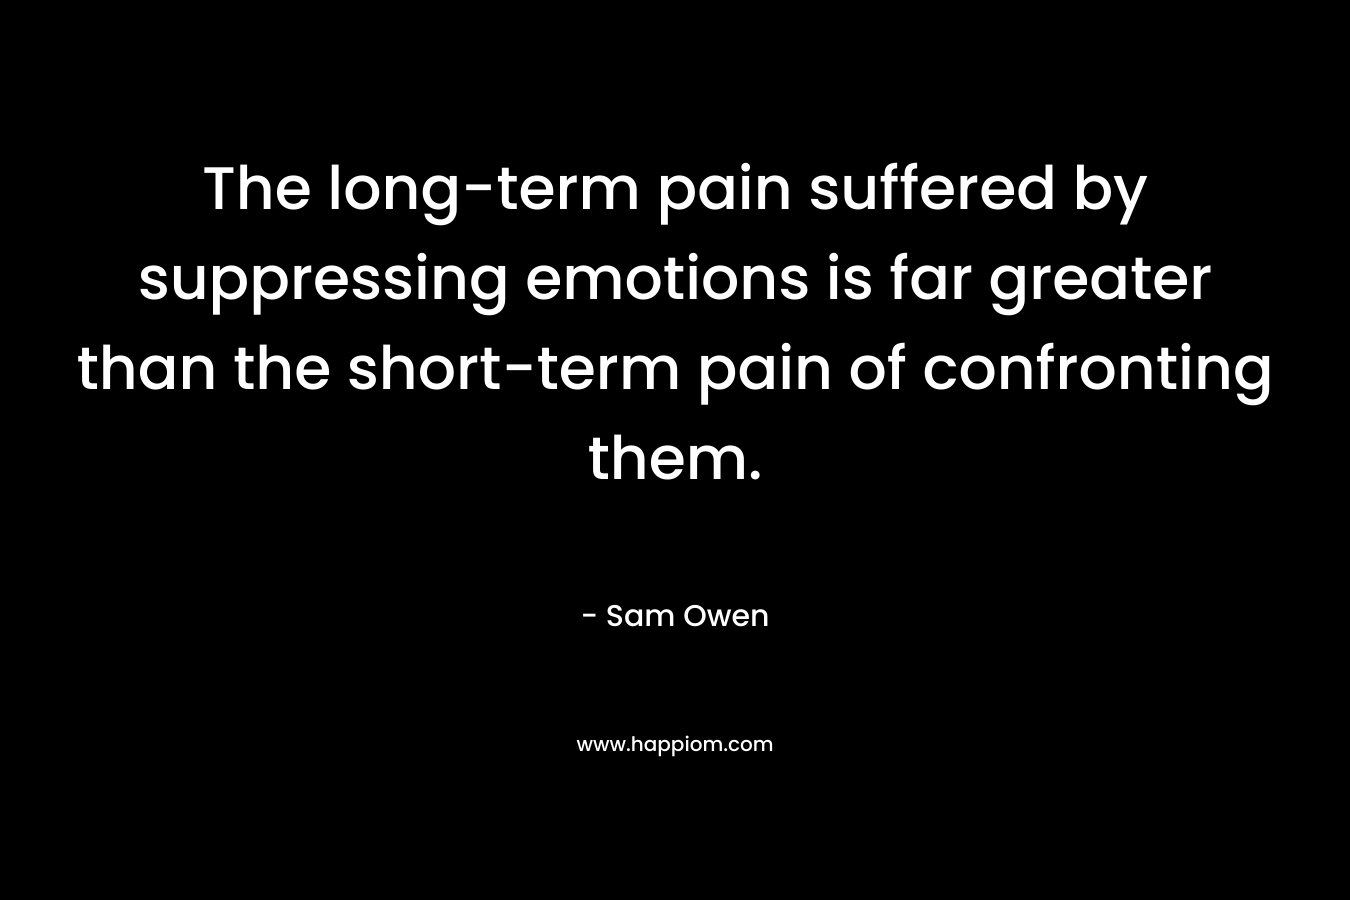 The long-term pain suffered by suppressing emotions is far greater than the short-term pain of confronting them.